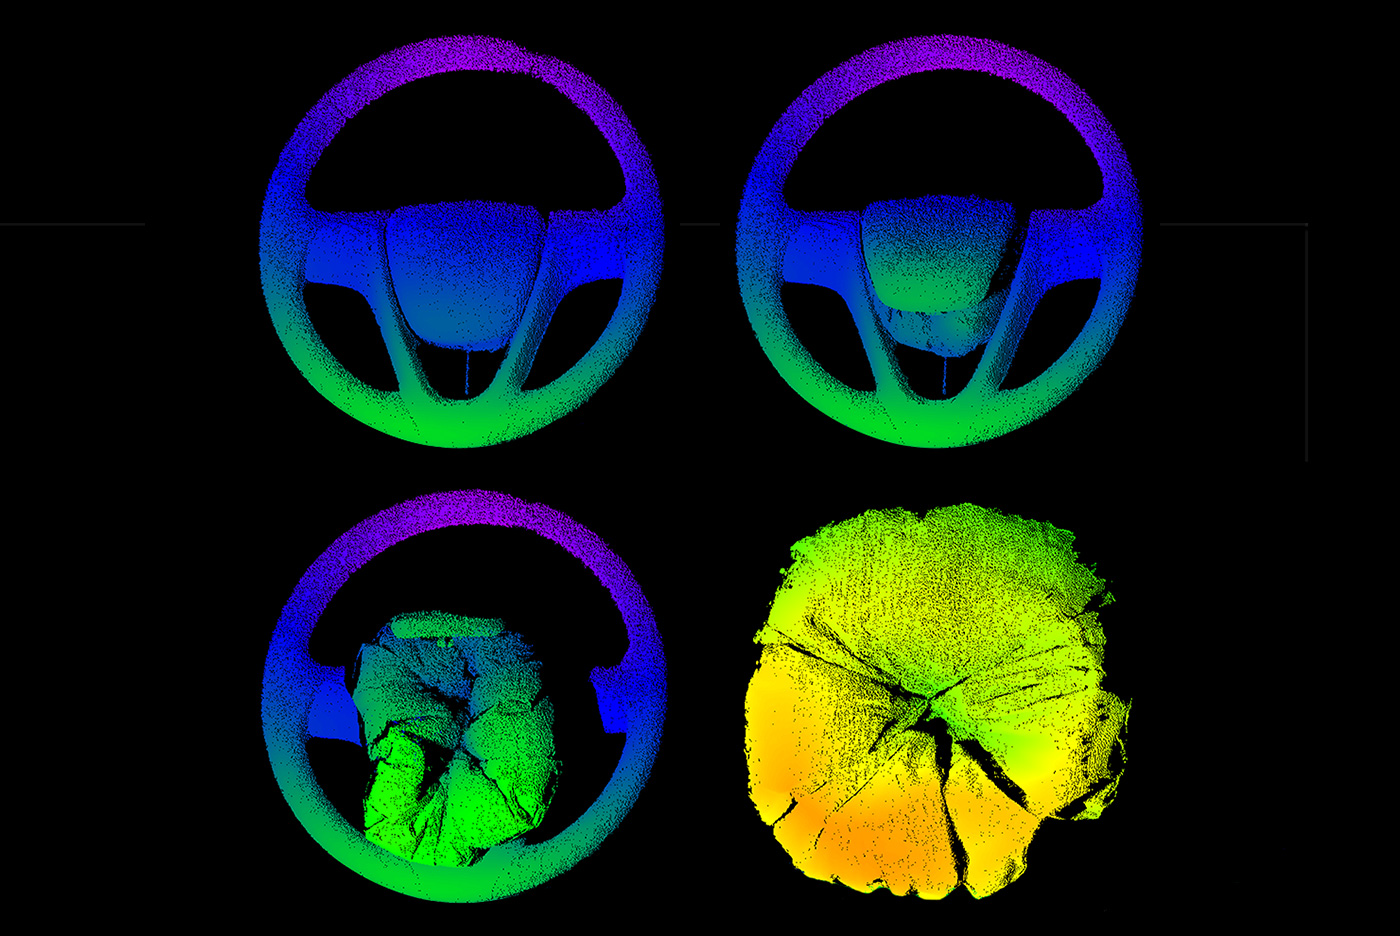 3D images of the deployment of an airbag at four different points in time.